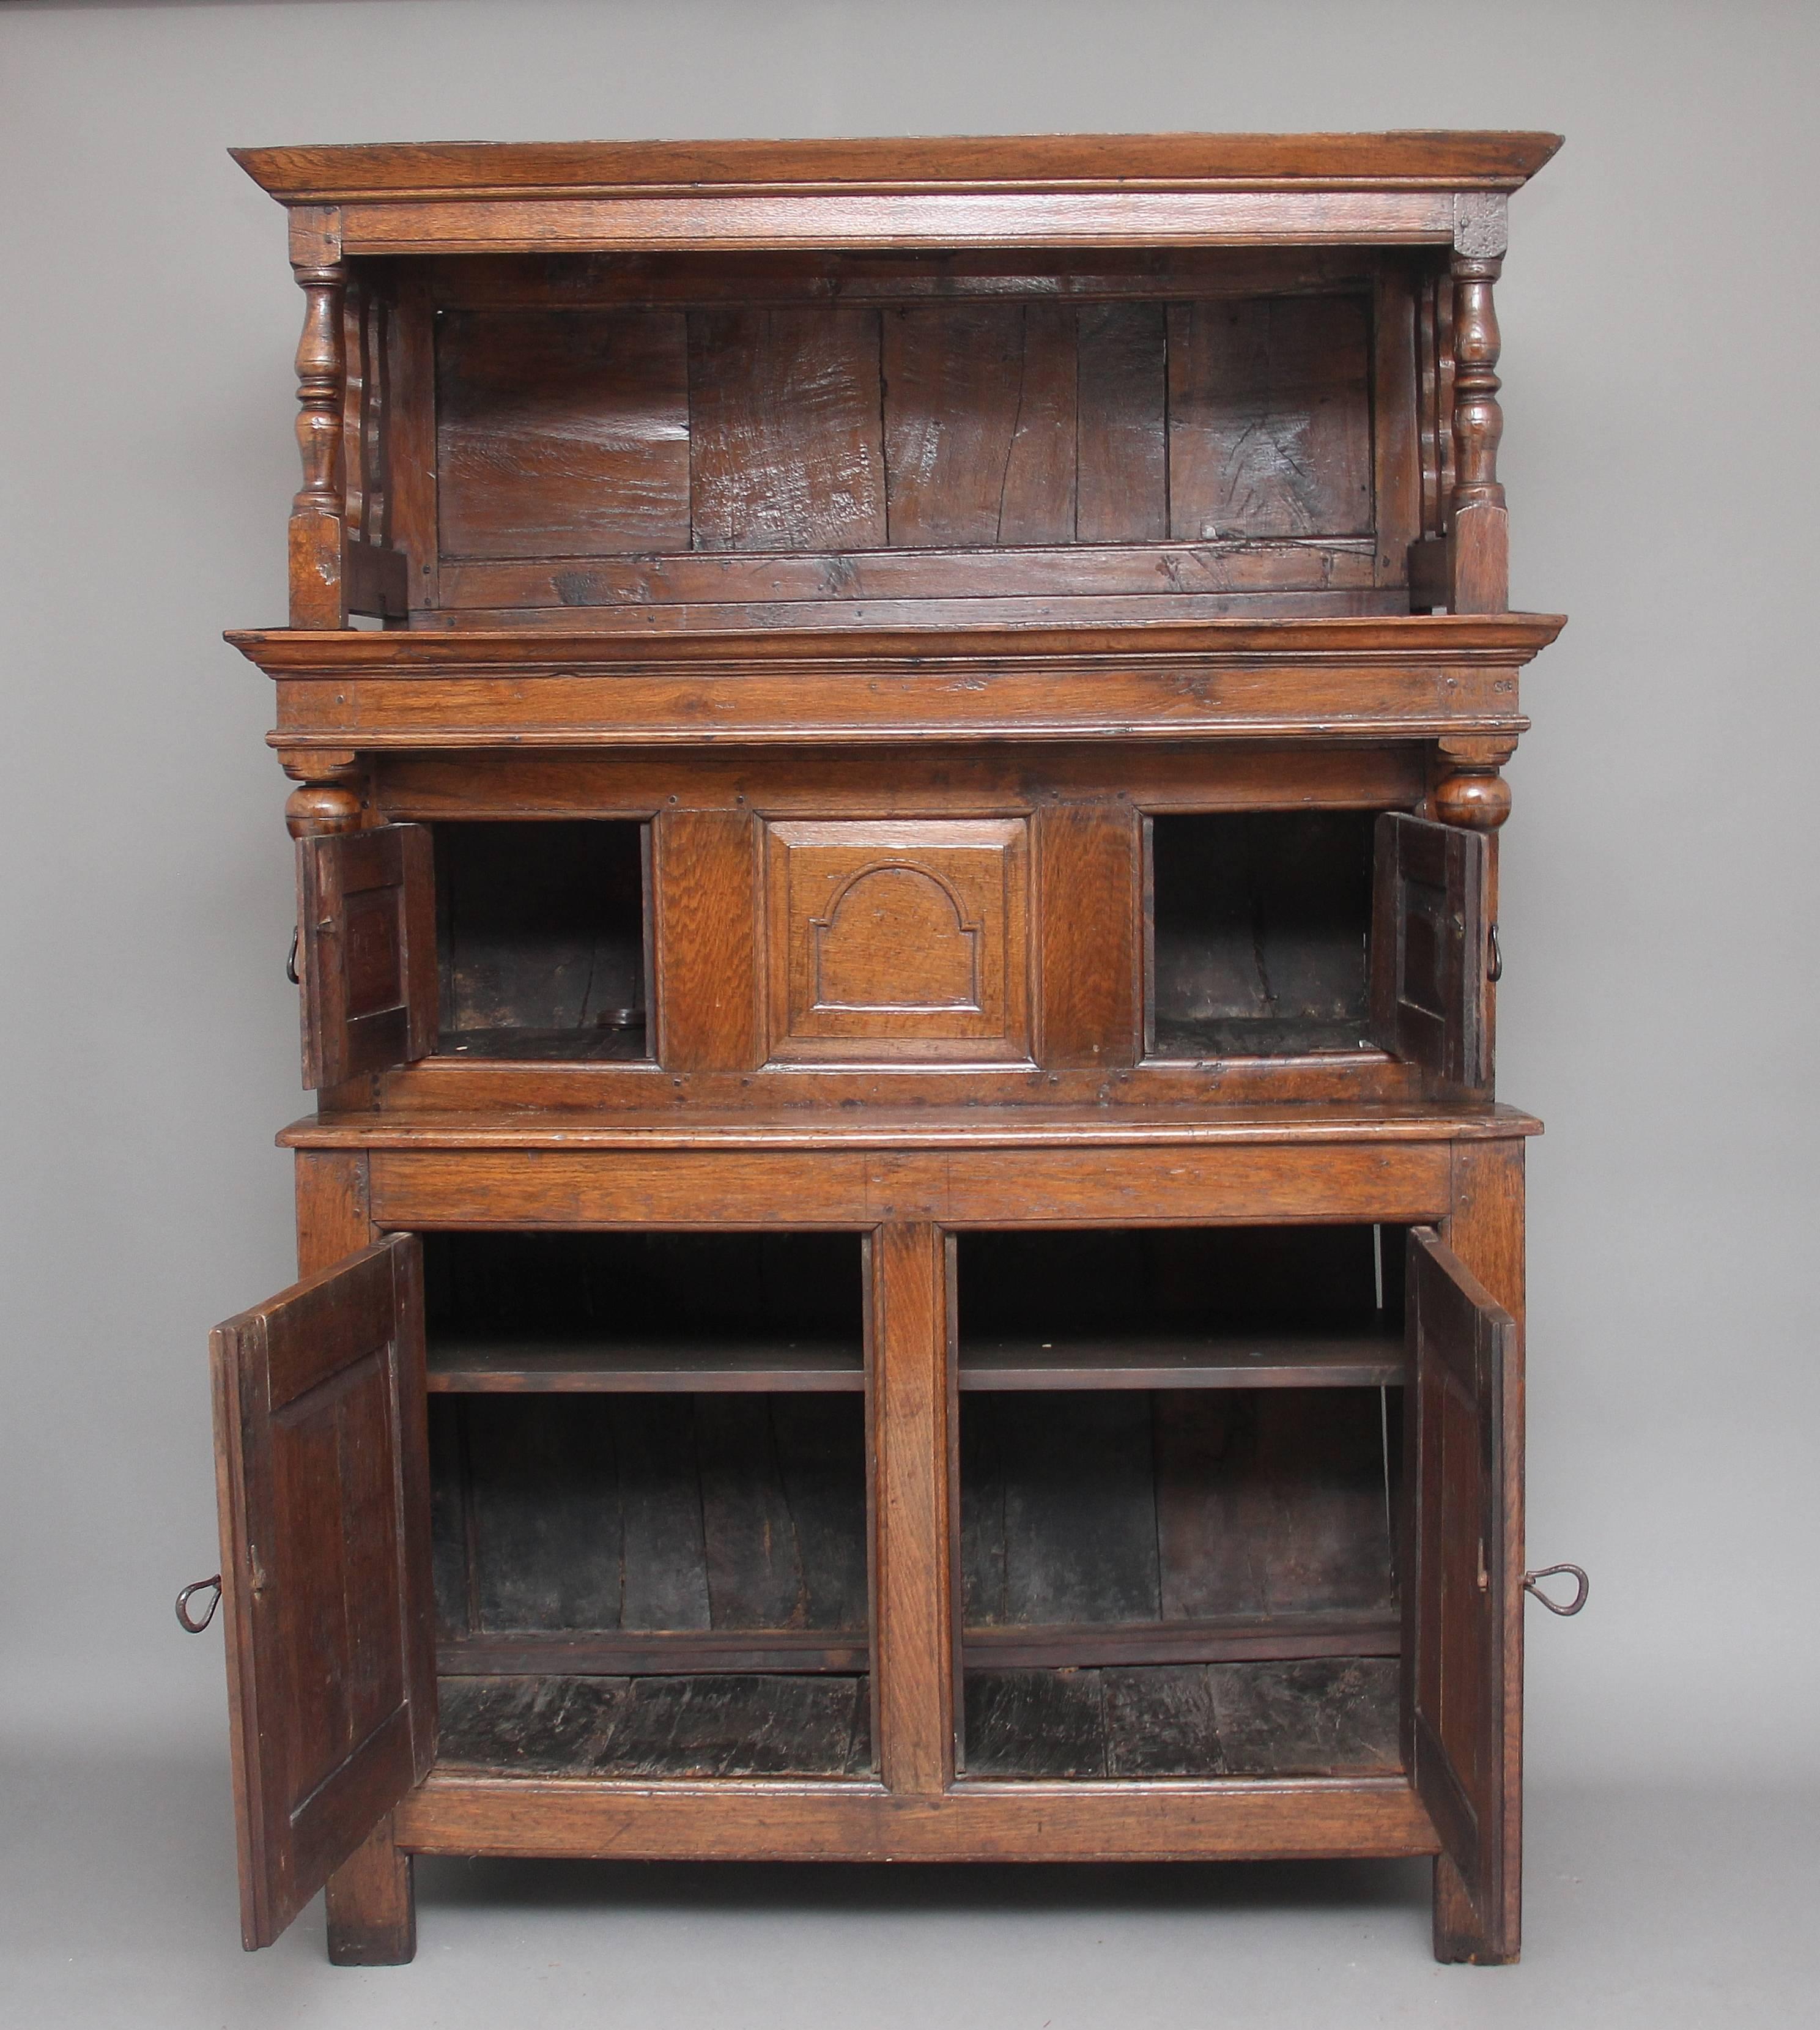 Early 18th century oak tridard / court cupboard in three sections, the open top section supported on turned columns above the middle section with two fielded panel doors each side of a central arched fielded panel, lovely turned finial decoration